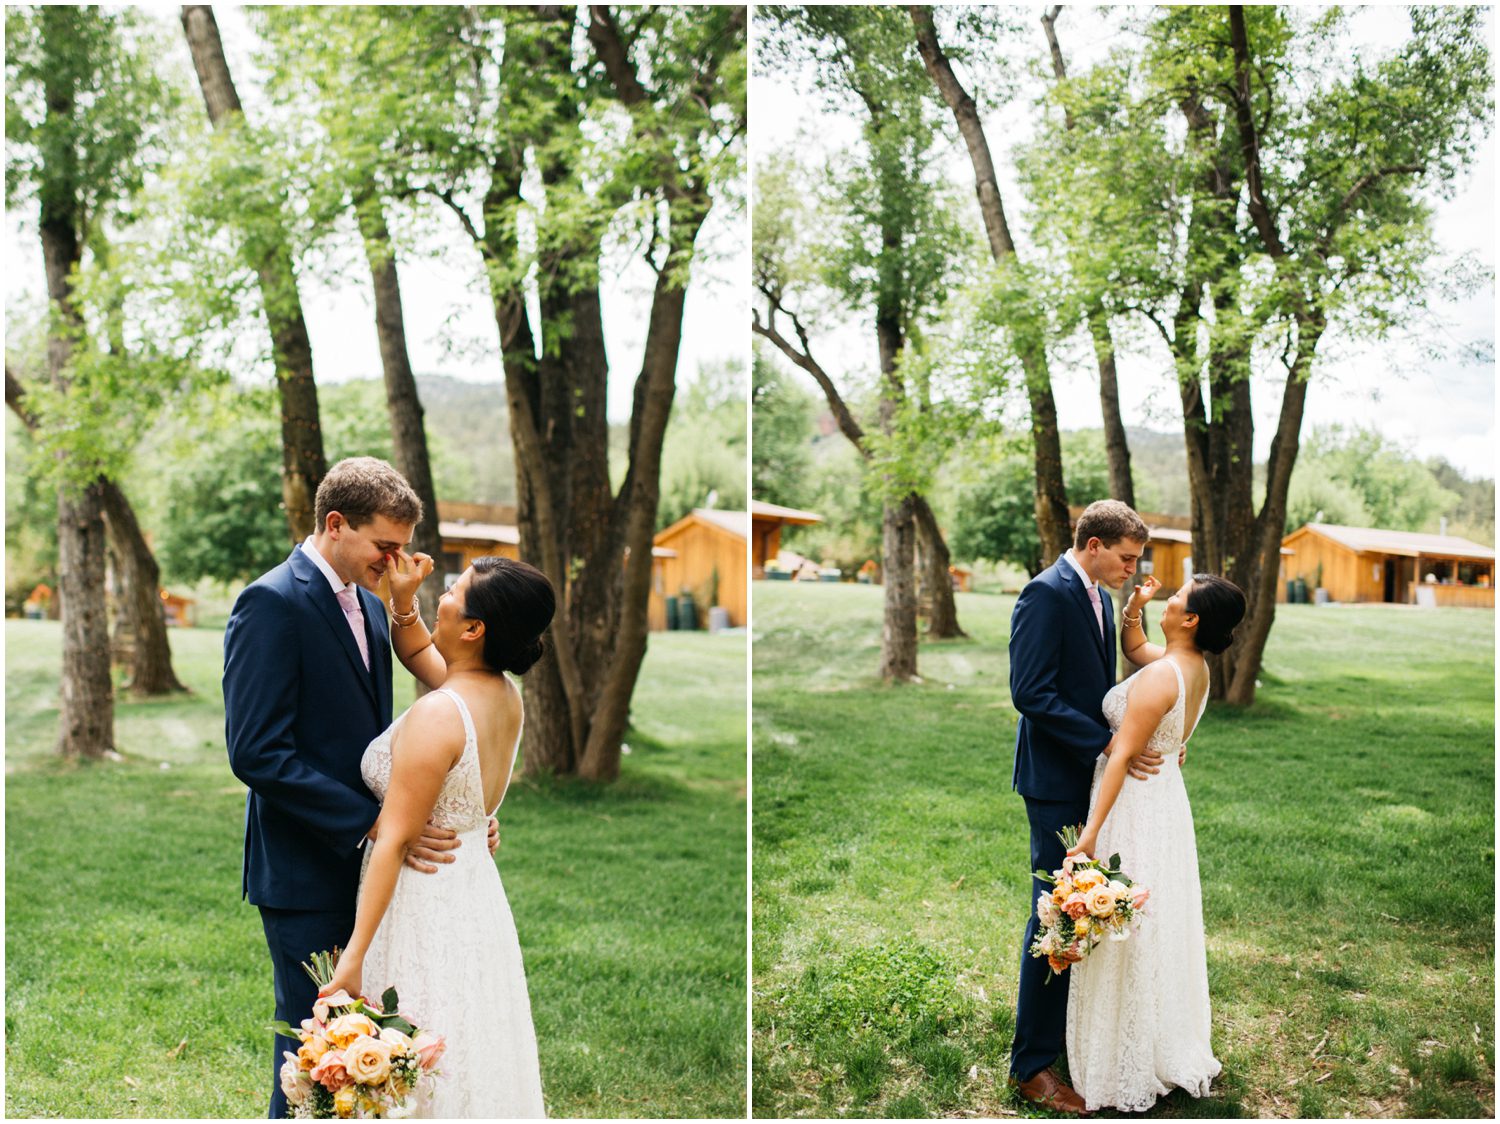 First look, first look ideas, first look photos, bride and groom first look, Colorado Wedding Photographer, Colorado Wedding Venue, Outdoor Colorado Wedding, Planet Bluegrass Colorado, Lyons Farmette Colorado, Riverbend Colorado, Colorado Photographer, Colorado Elopement Photographer, Colorado Wedding Inspiration